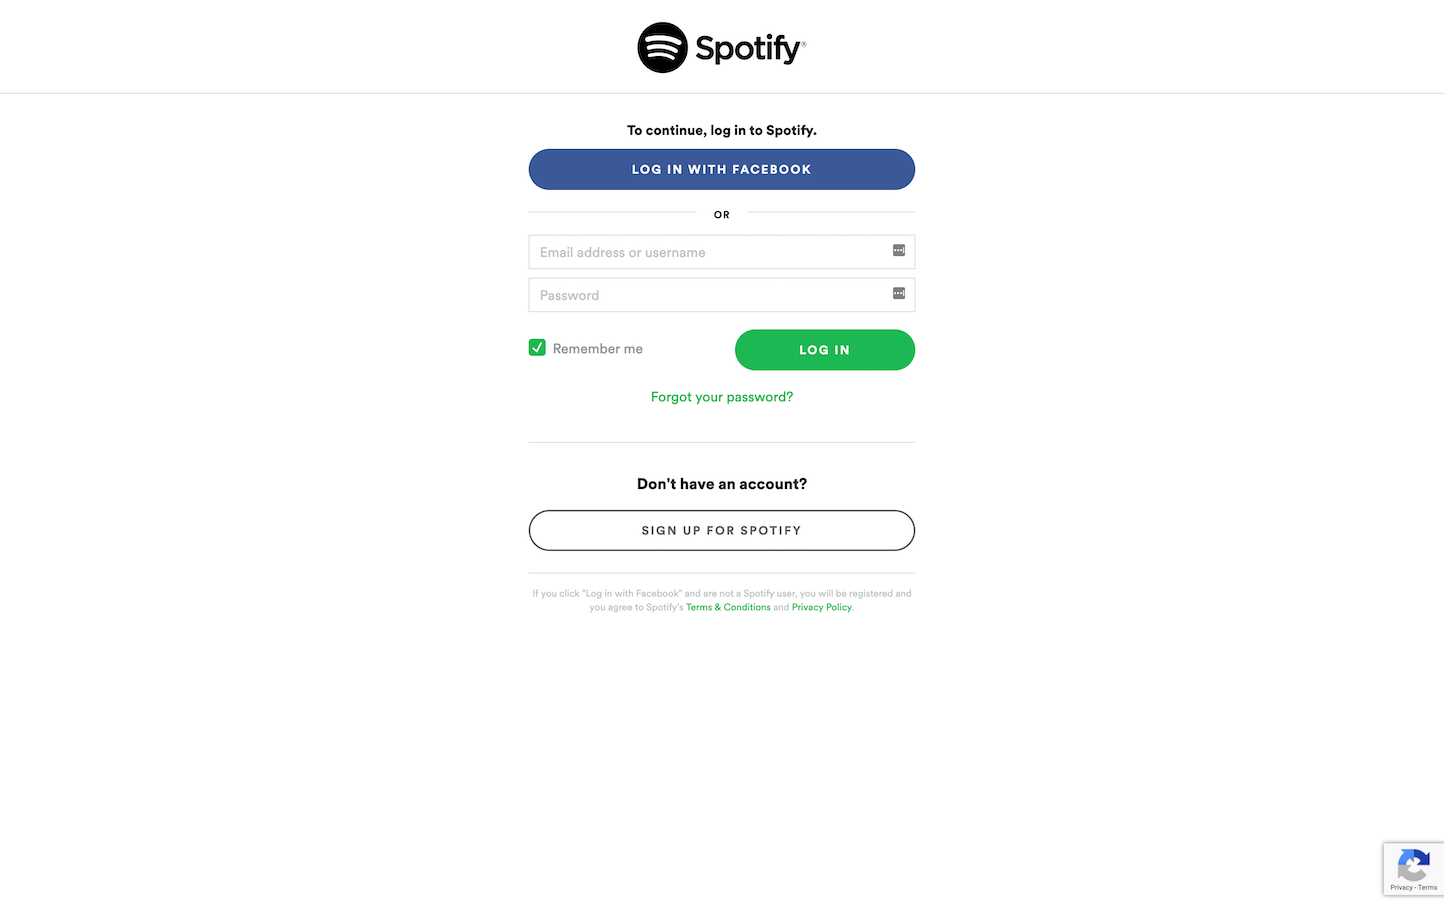 Screenshot of the Login page from the Spotify website.